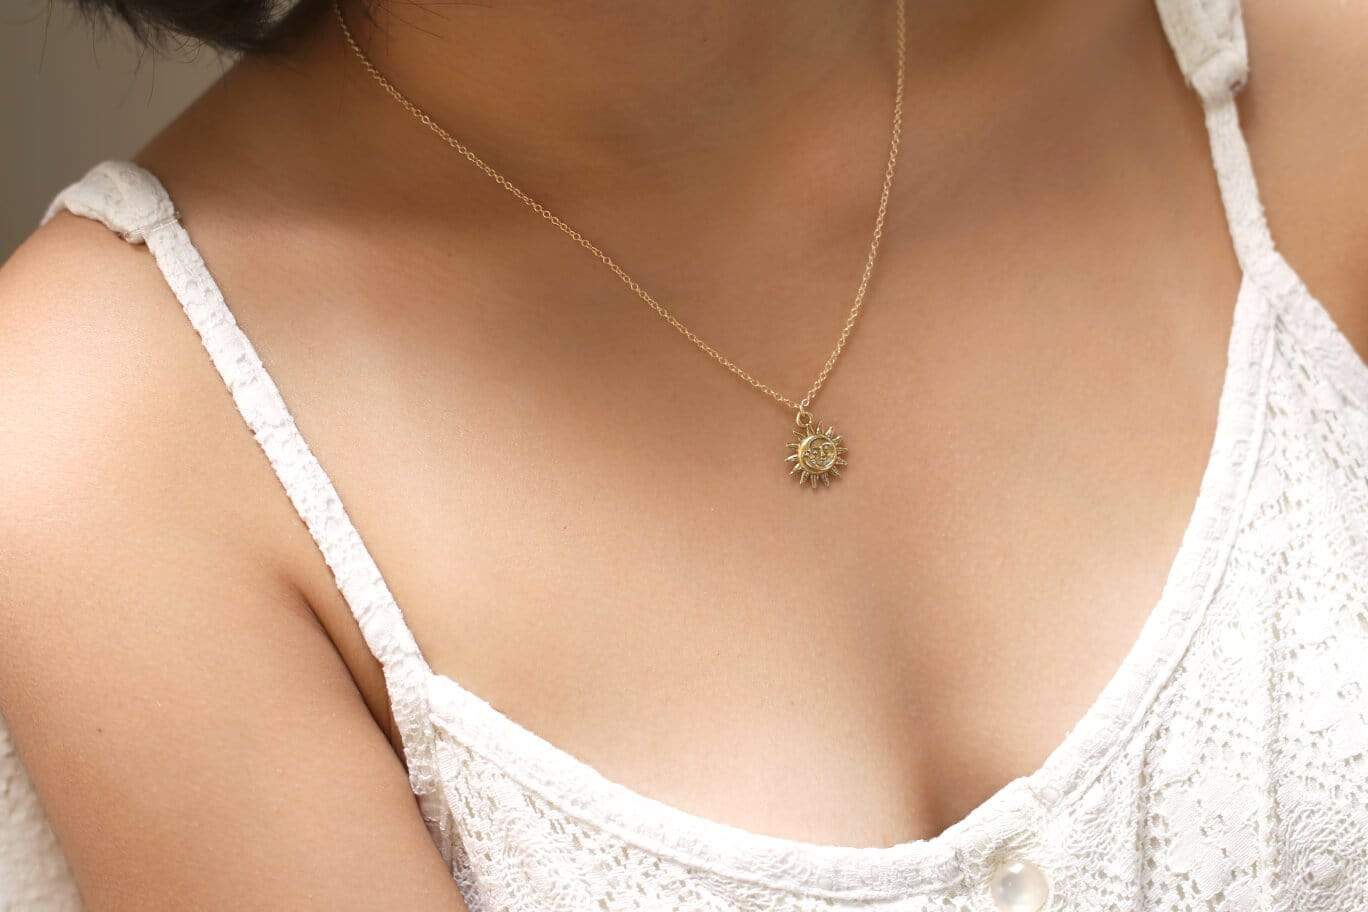 MaeMae Customer wearing a 14k Gold Filled Light After Dark Necklace with a Gold Sun Moon Charm.